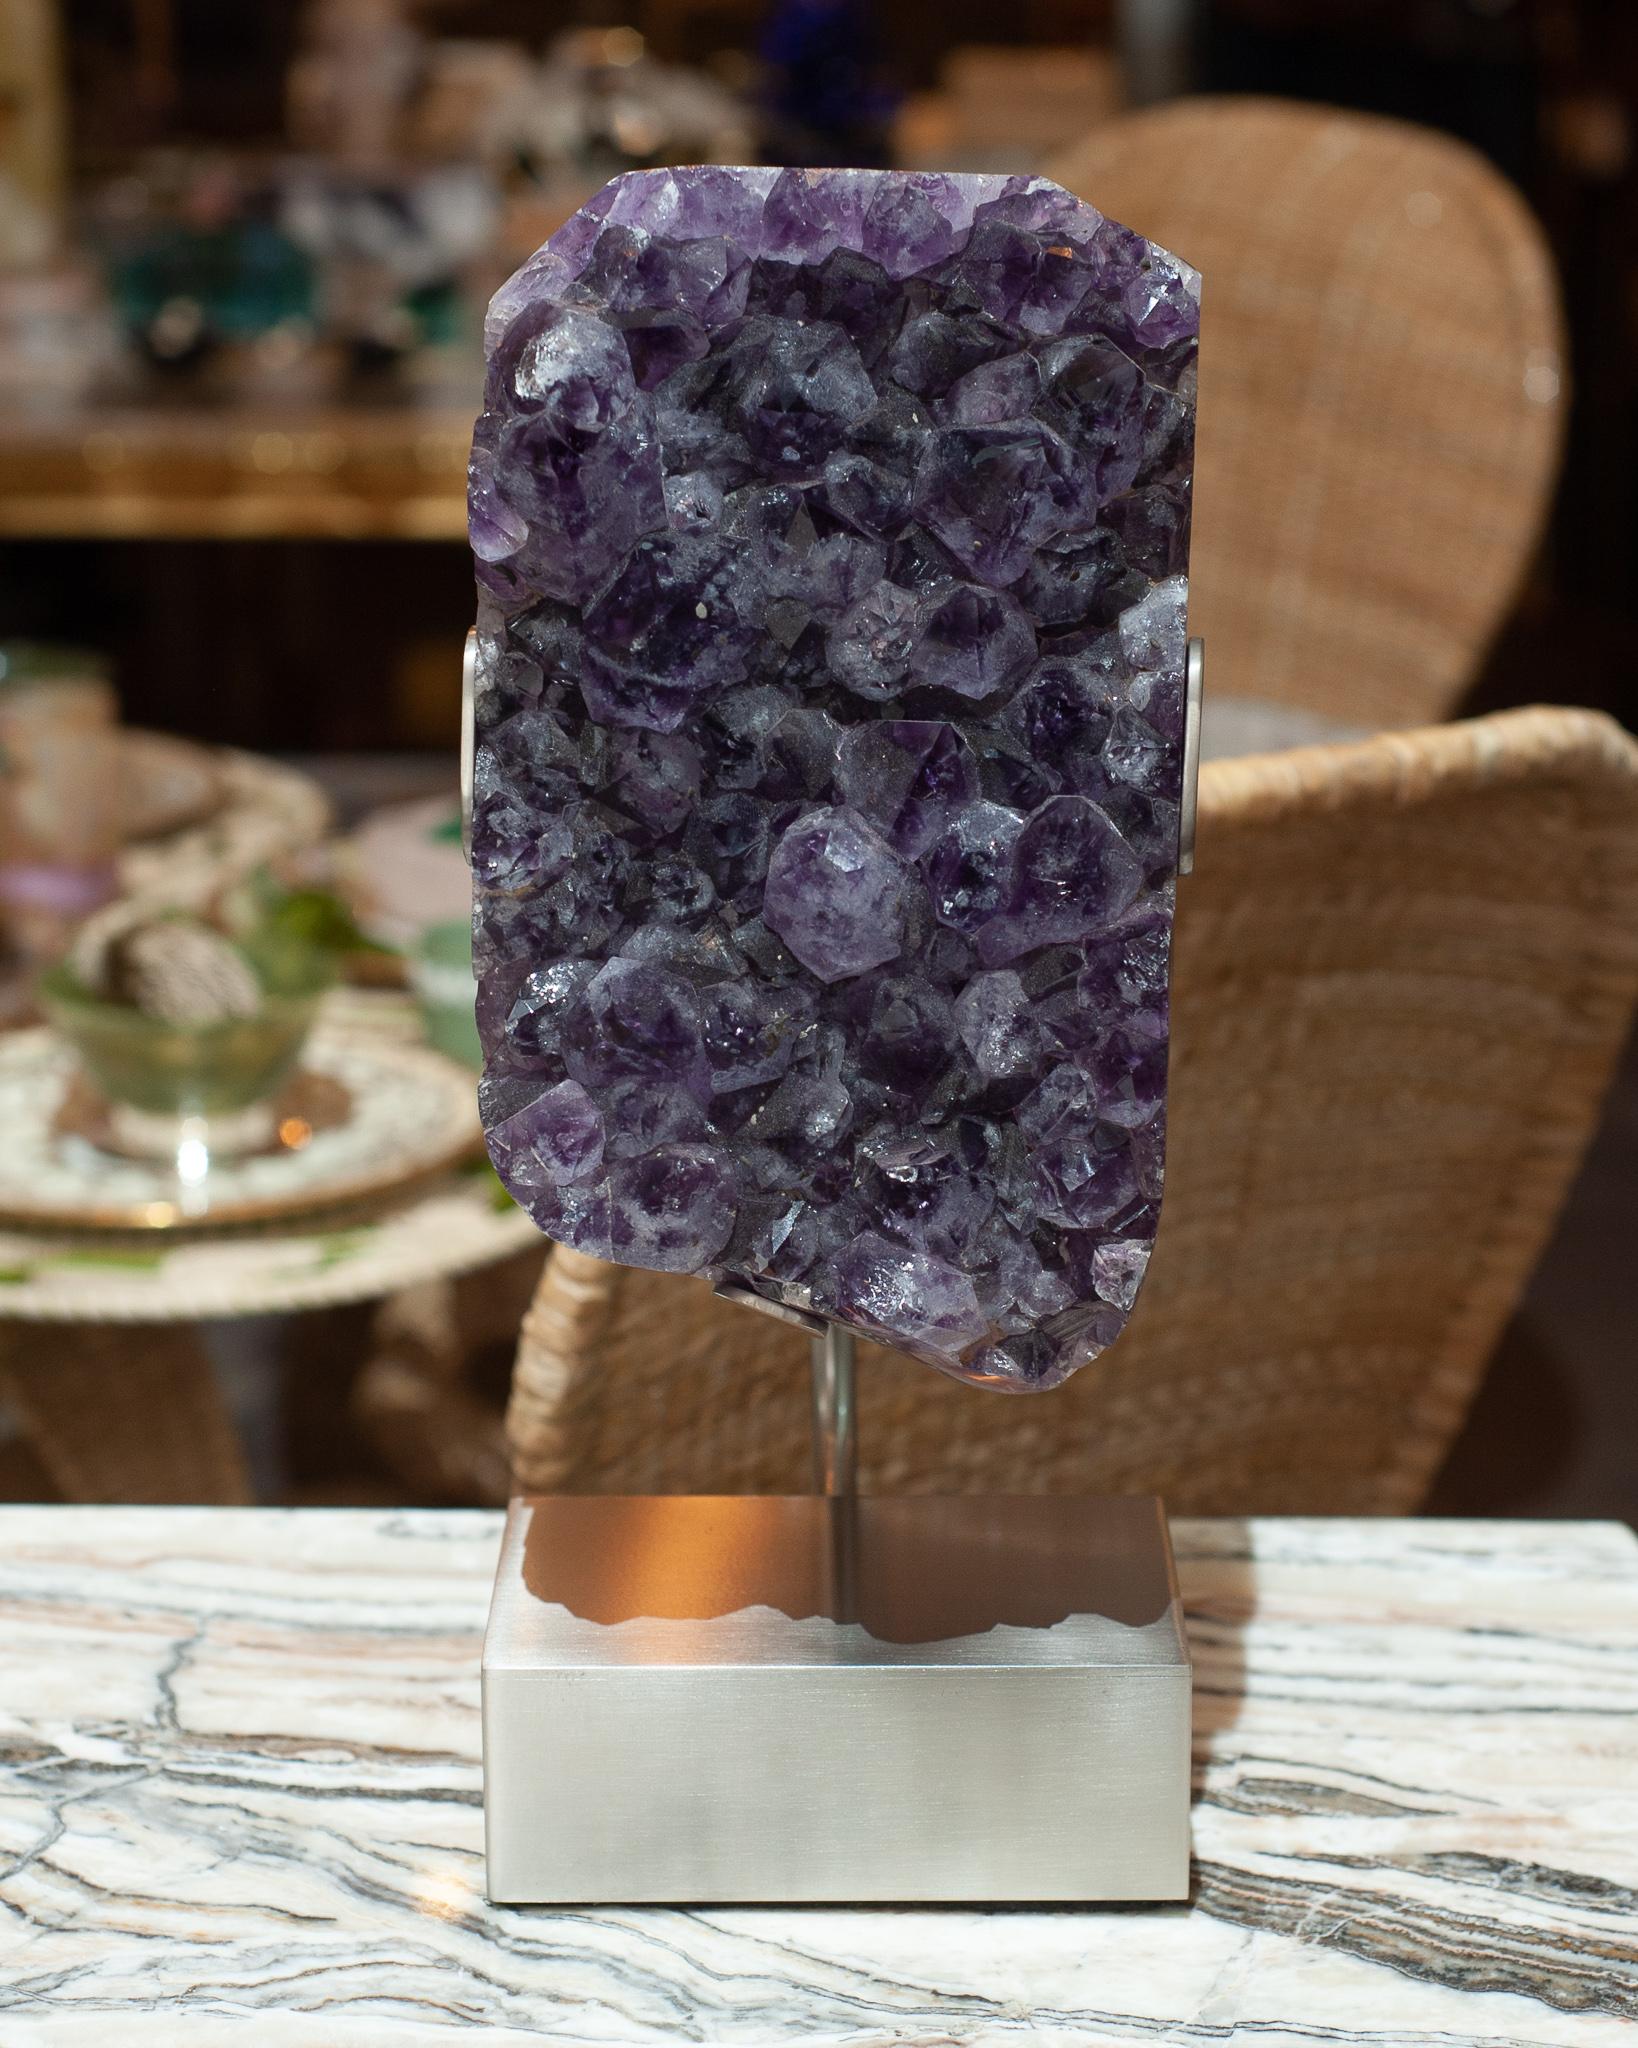 A gorgeous large amethyst specimen mounted on a custom brushed nickel base by Studio Maison Nurita. A natural thick piece of amethyst is suspended by the specialized mounting, creating both an energetic and highly decorative interior item for the